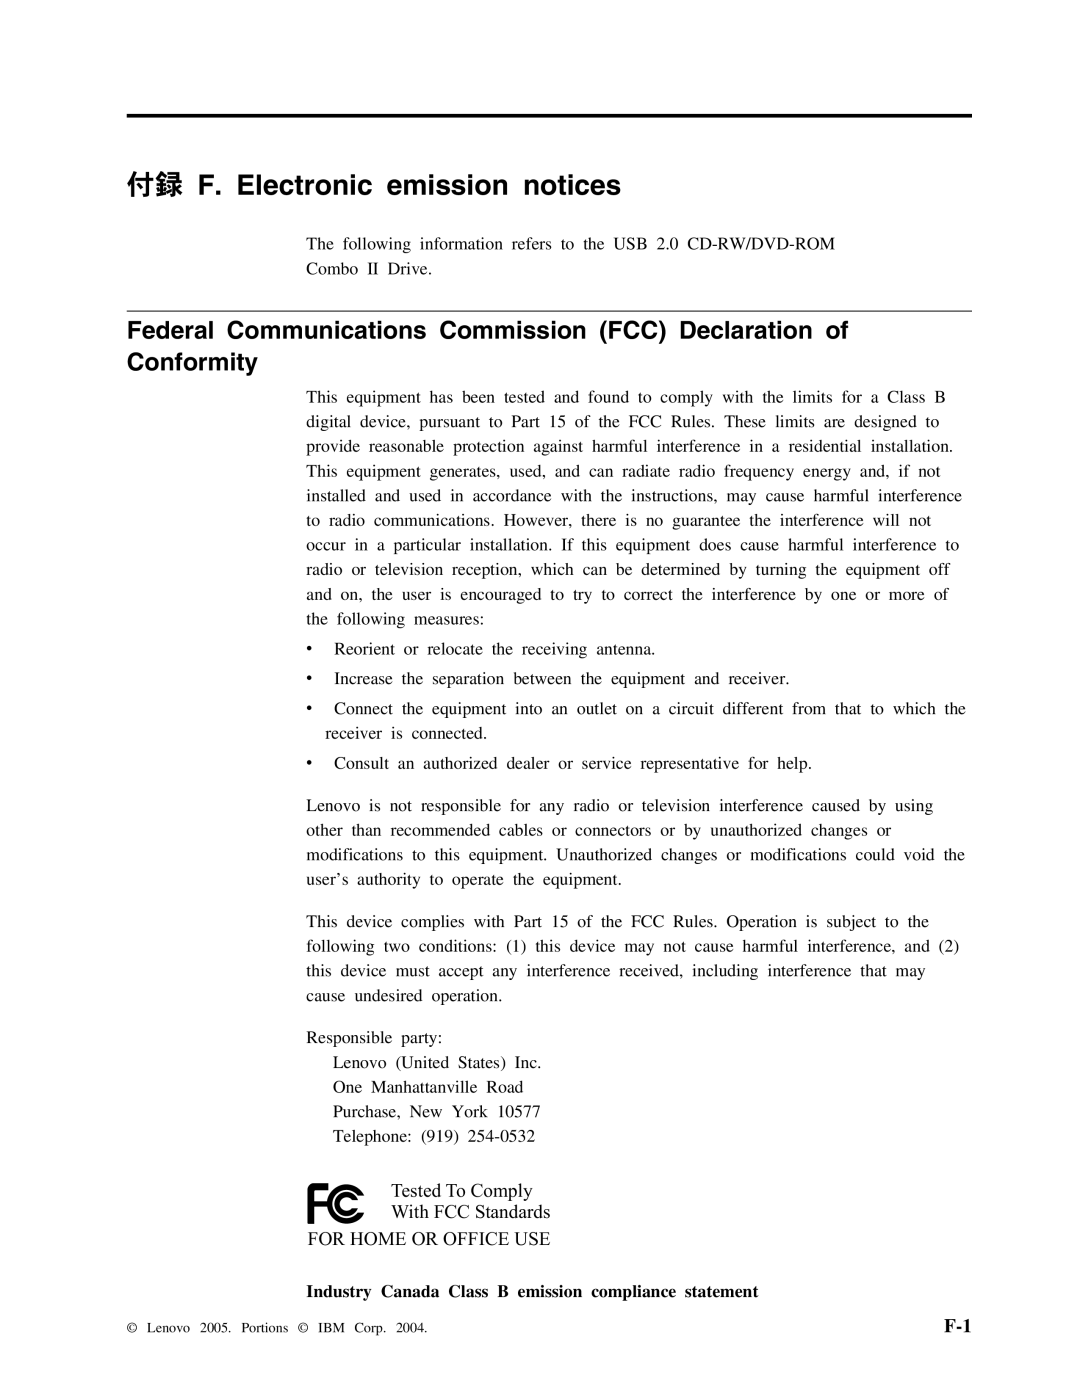 Lenovo 40Y8637, 40Y8692 付録 F. Electronic emission notices, Tested To Comply With FCC Standards, For Home Or Office Use 